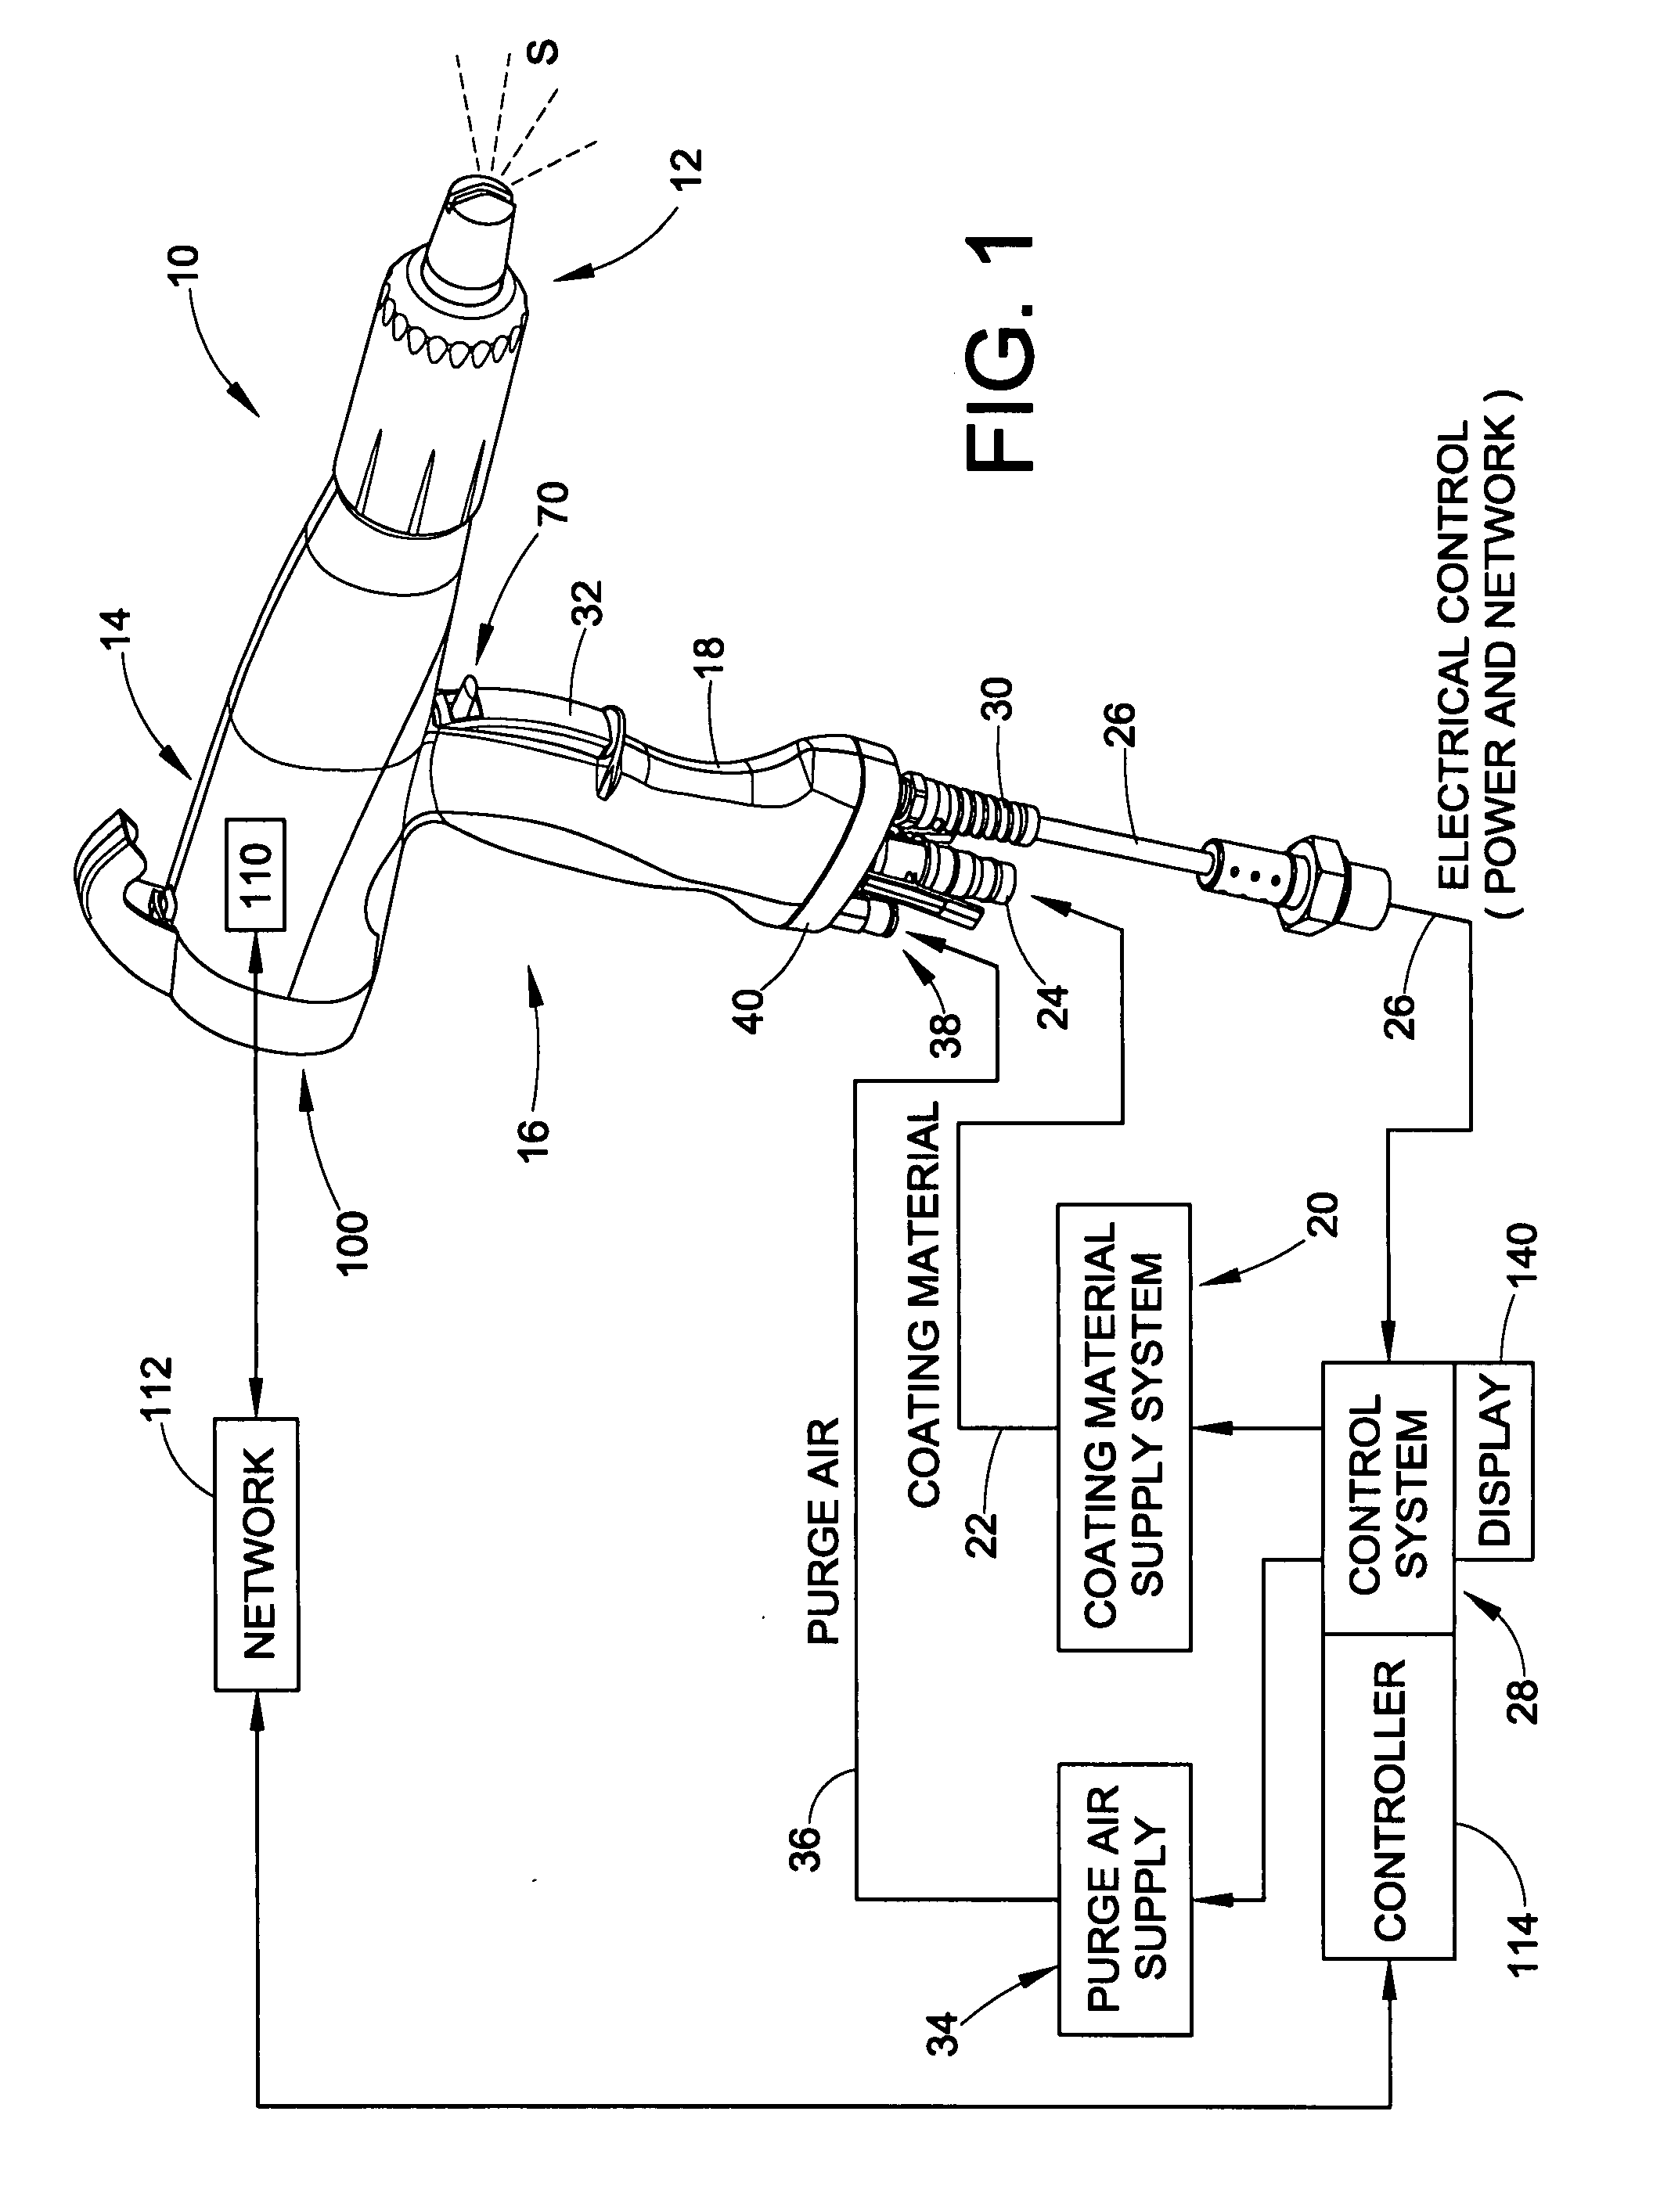 Control function and display for controlling spray gun